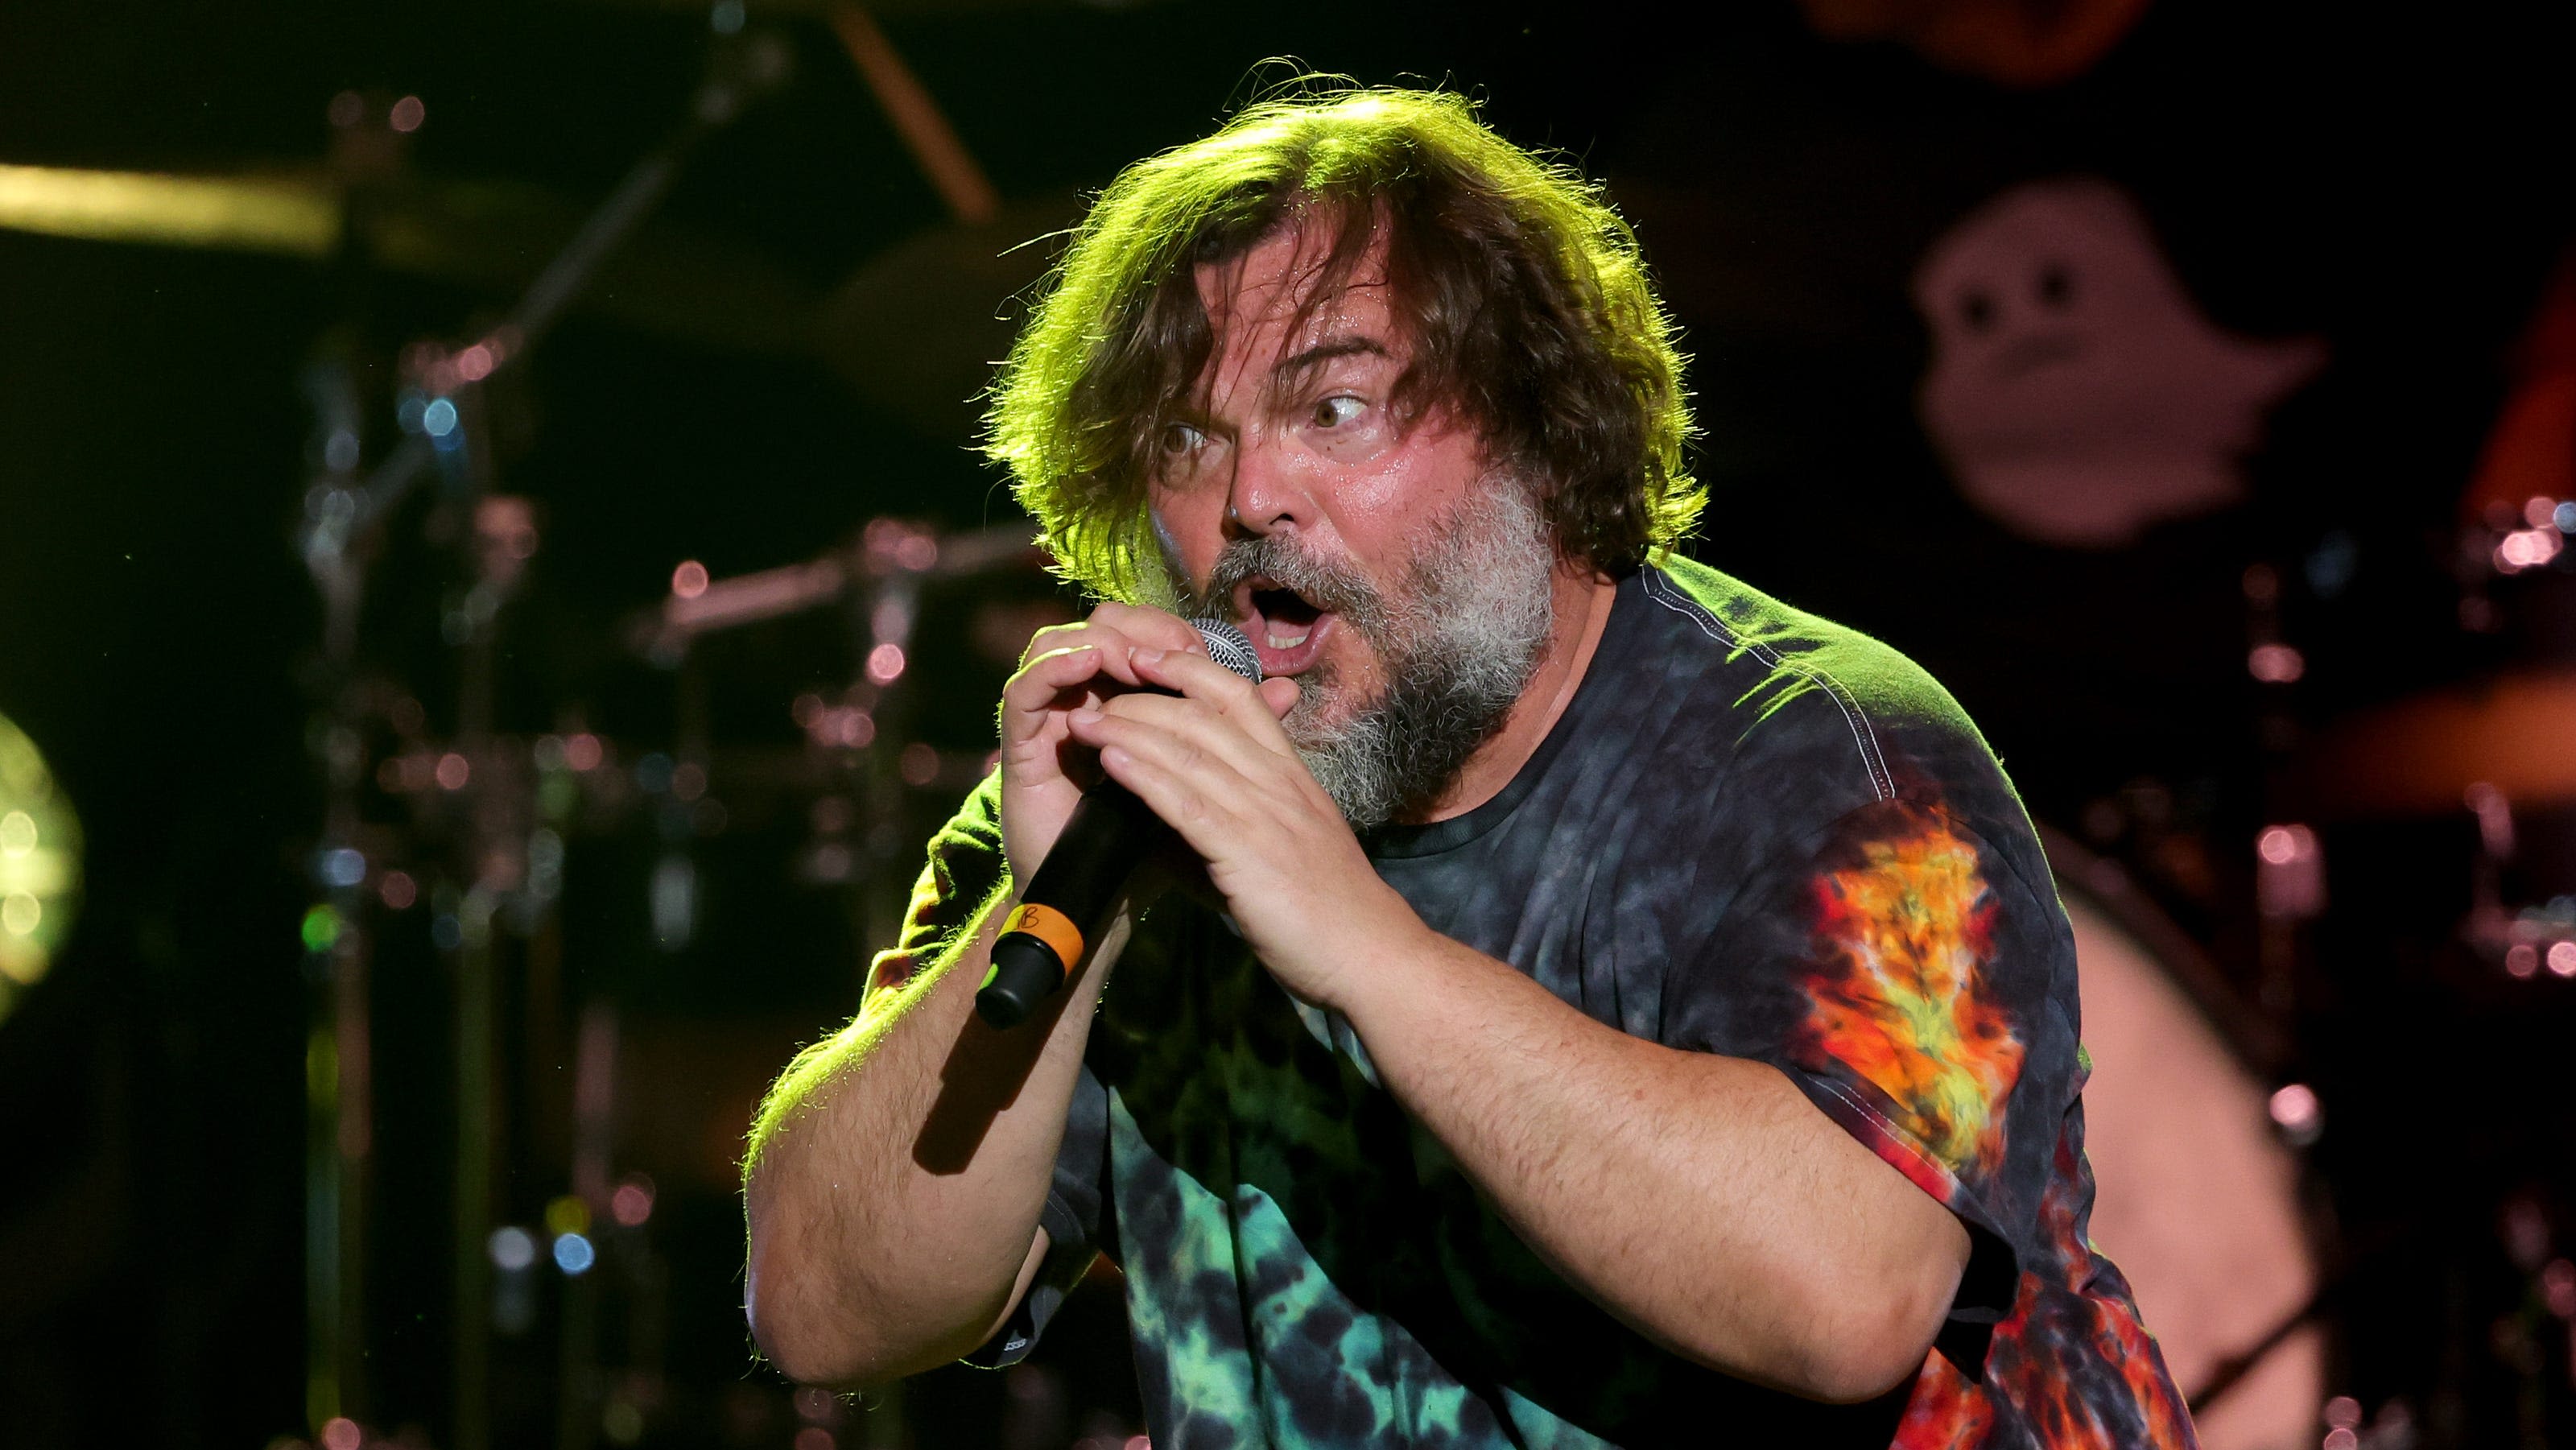 Jack Black responds to students' request to attend 'School of Rock' musical production